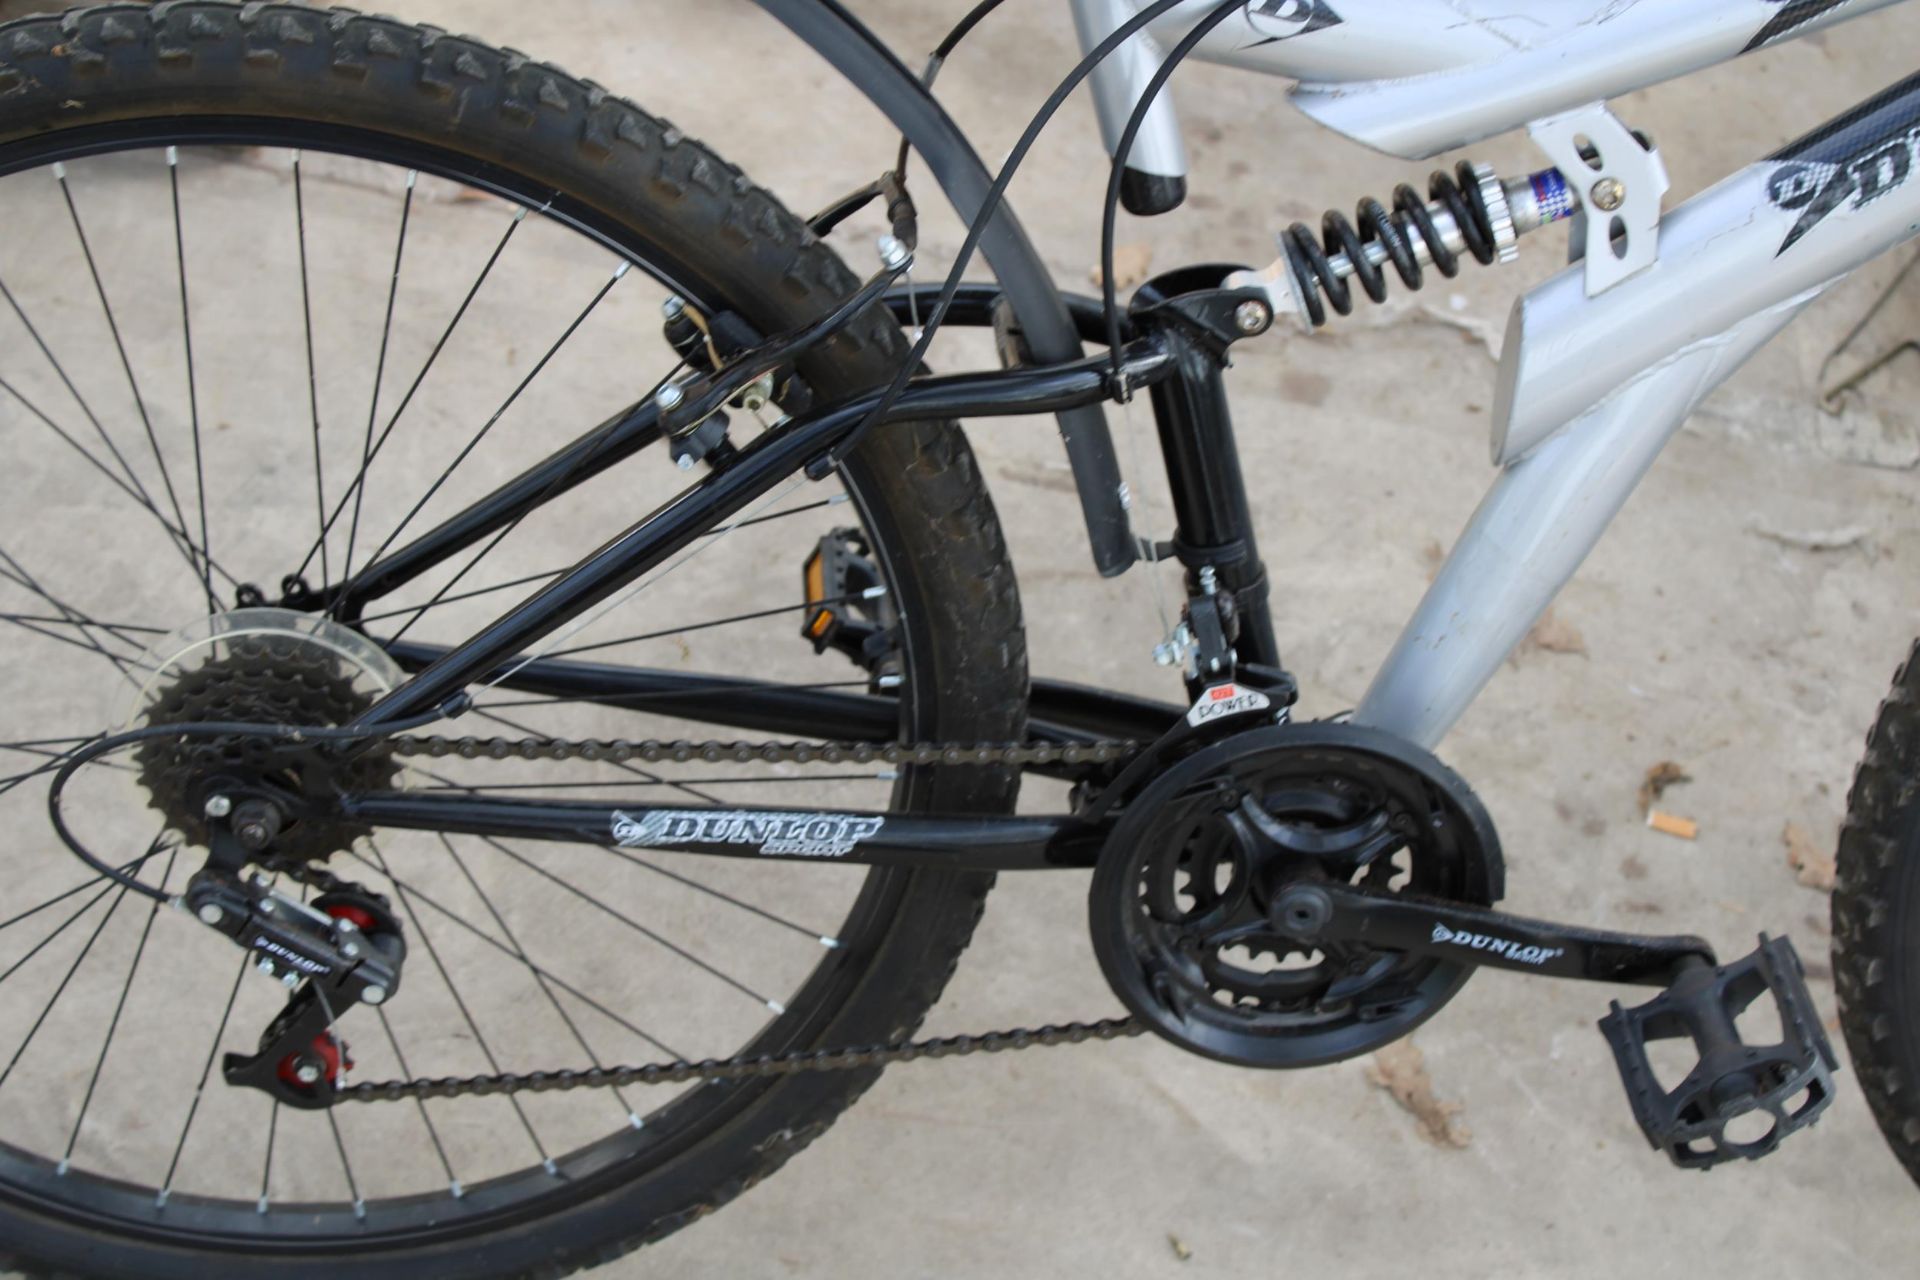 A DUNLOP SPECIAL EDITION MOUNTAIN BIKE WITH FRONT AND REAR SUSPENSION AND 18 SPEED GEAR SYSTEM - Image 3 of 4